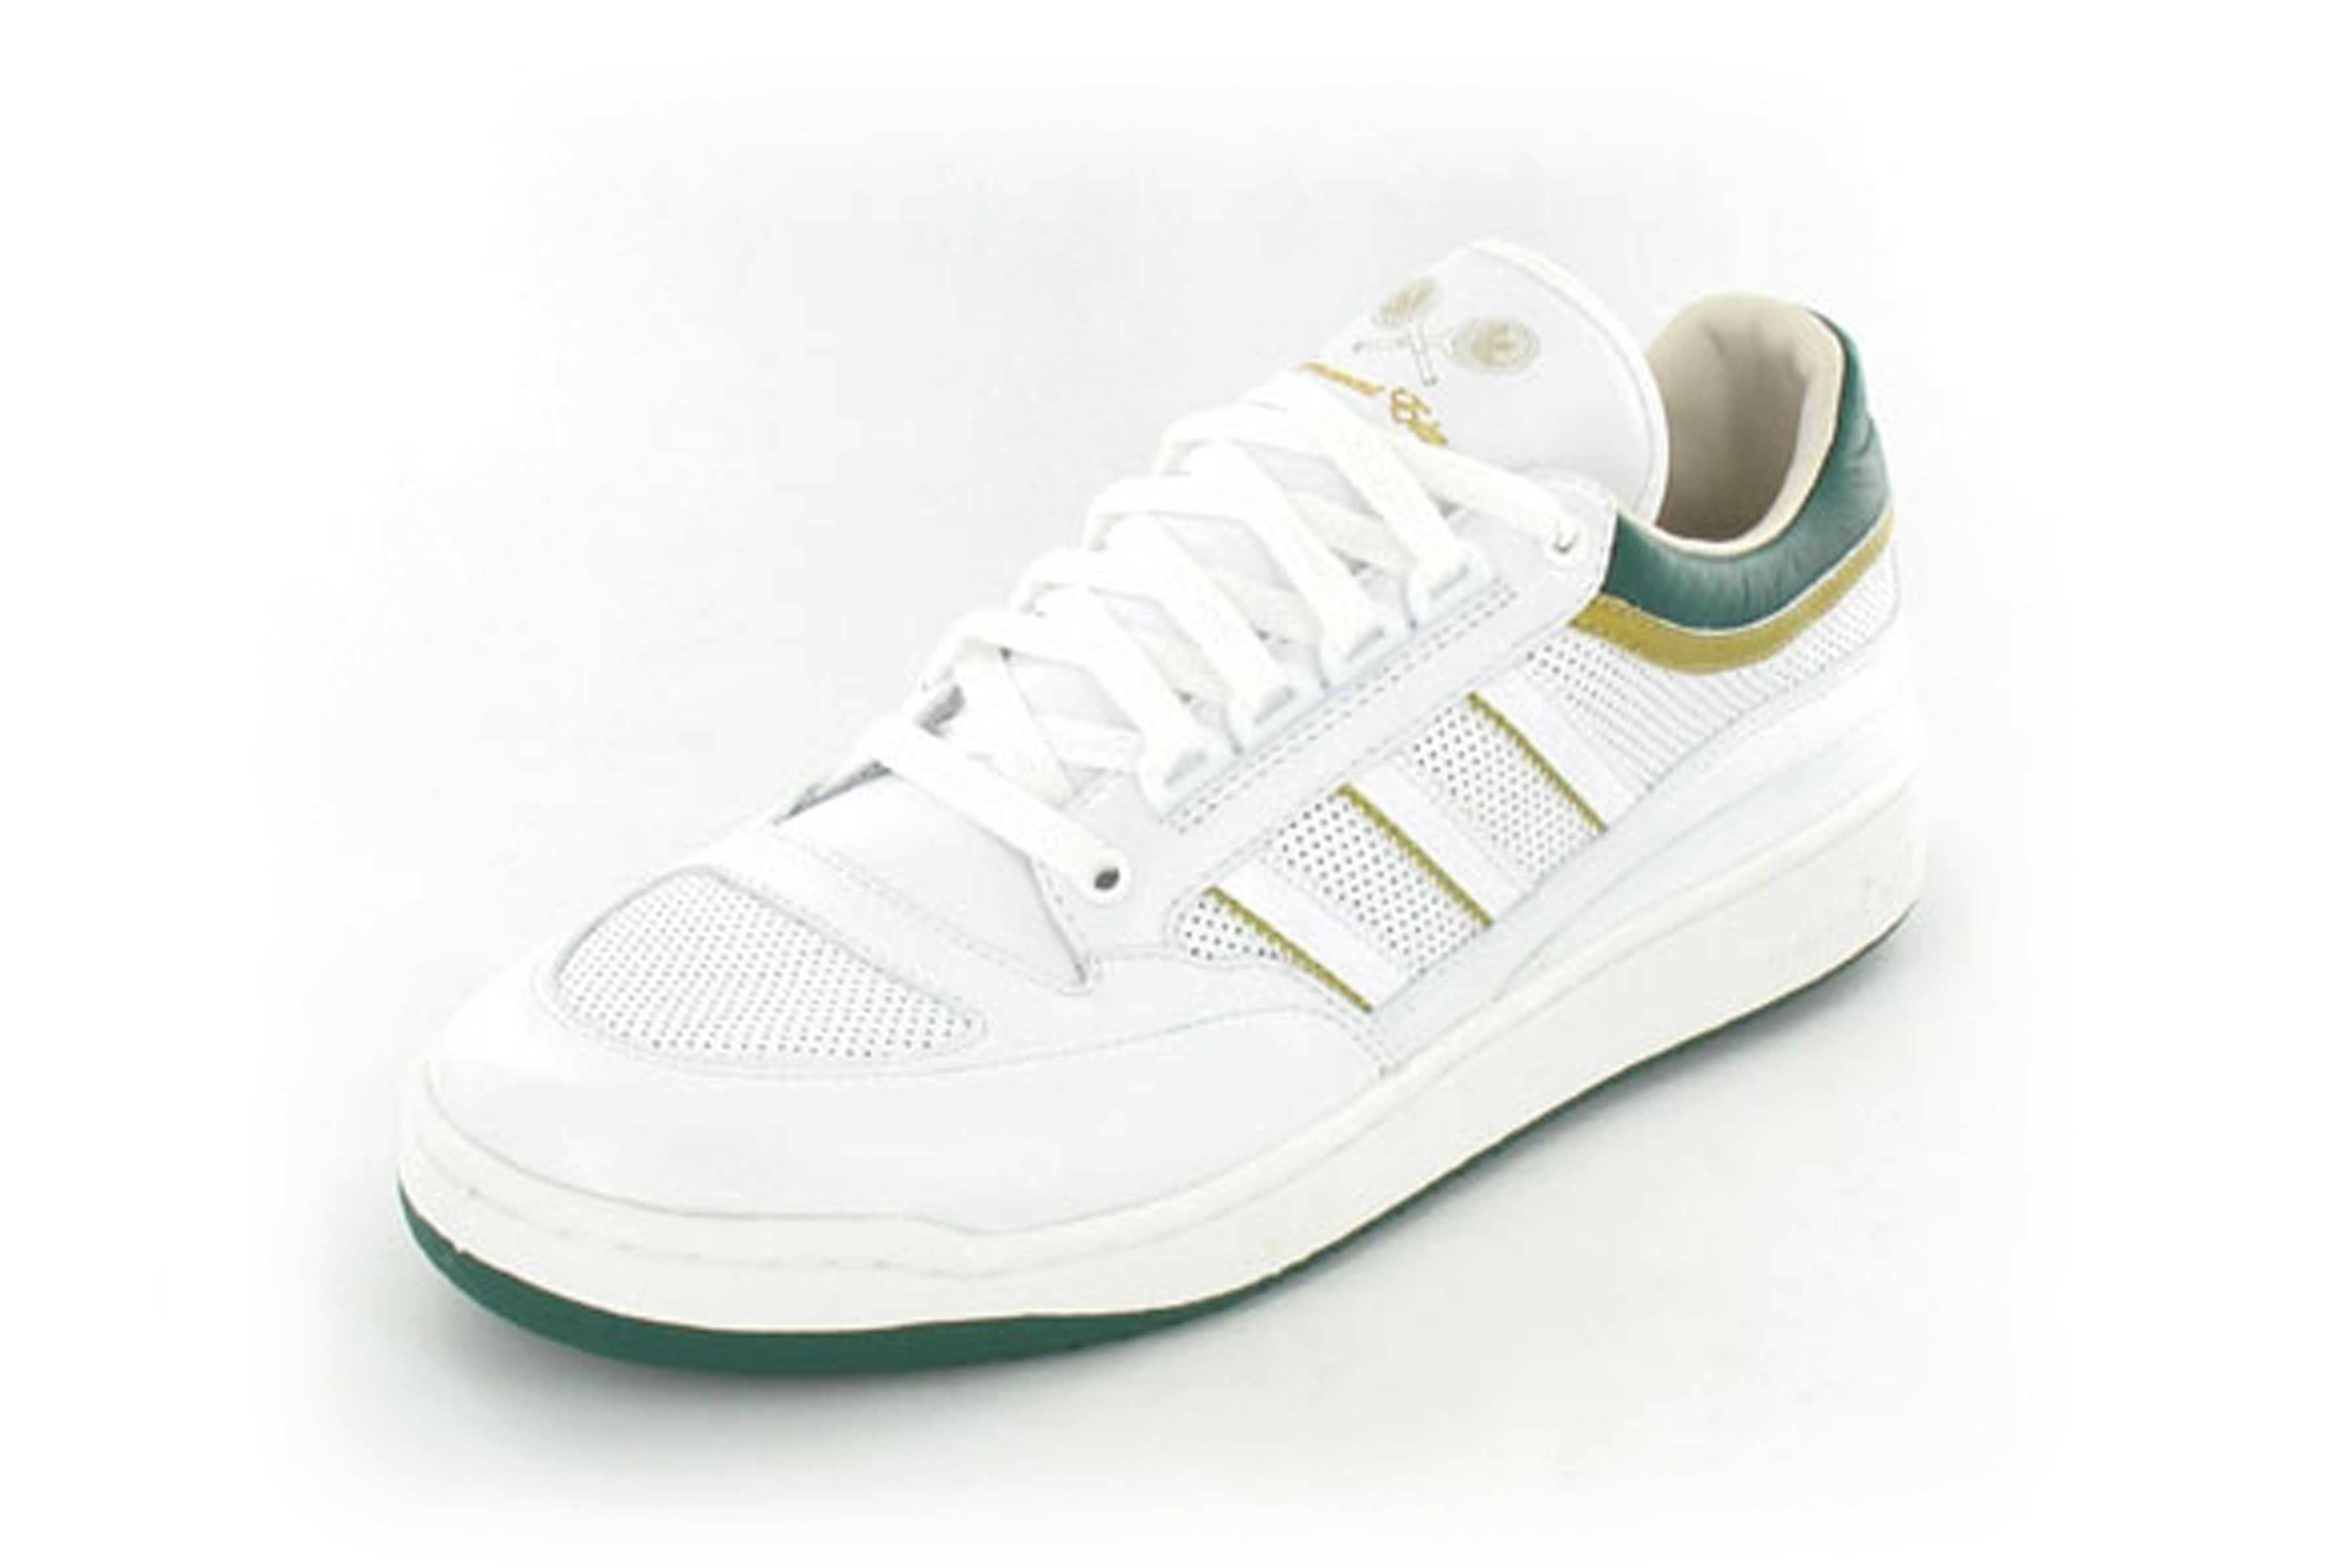 Lendl Competition Sneakers White/Forest Green